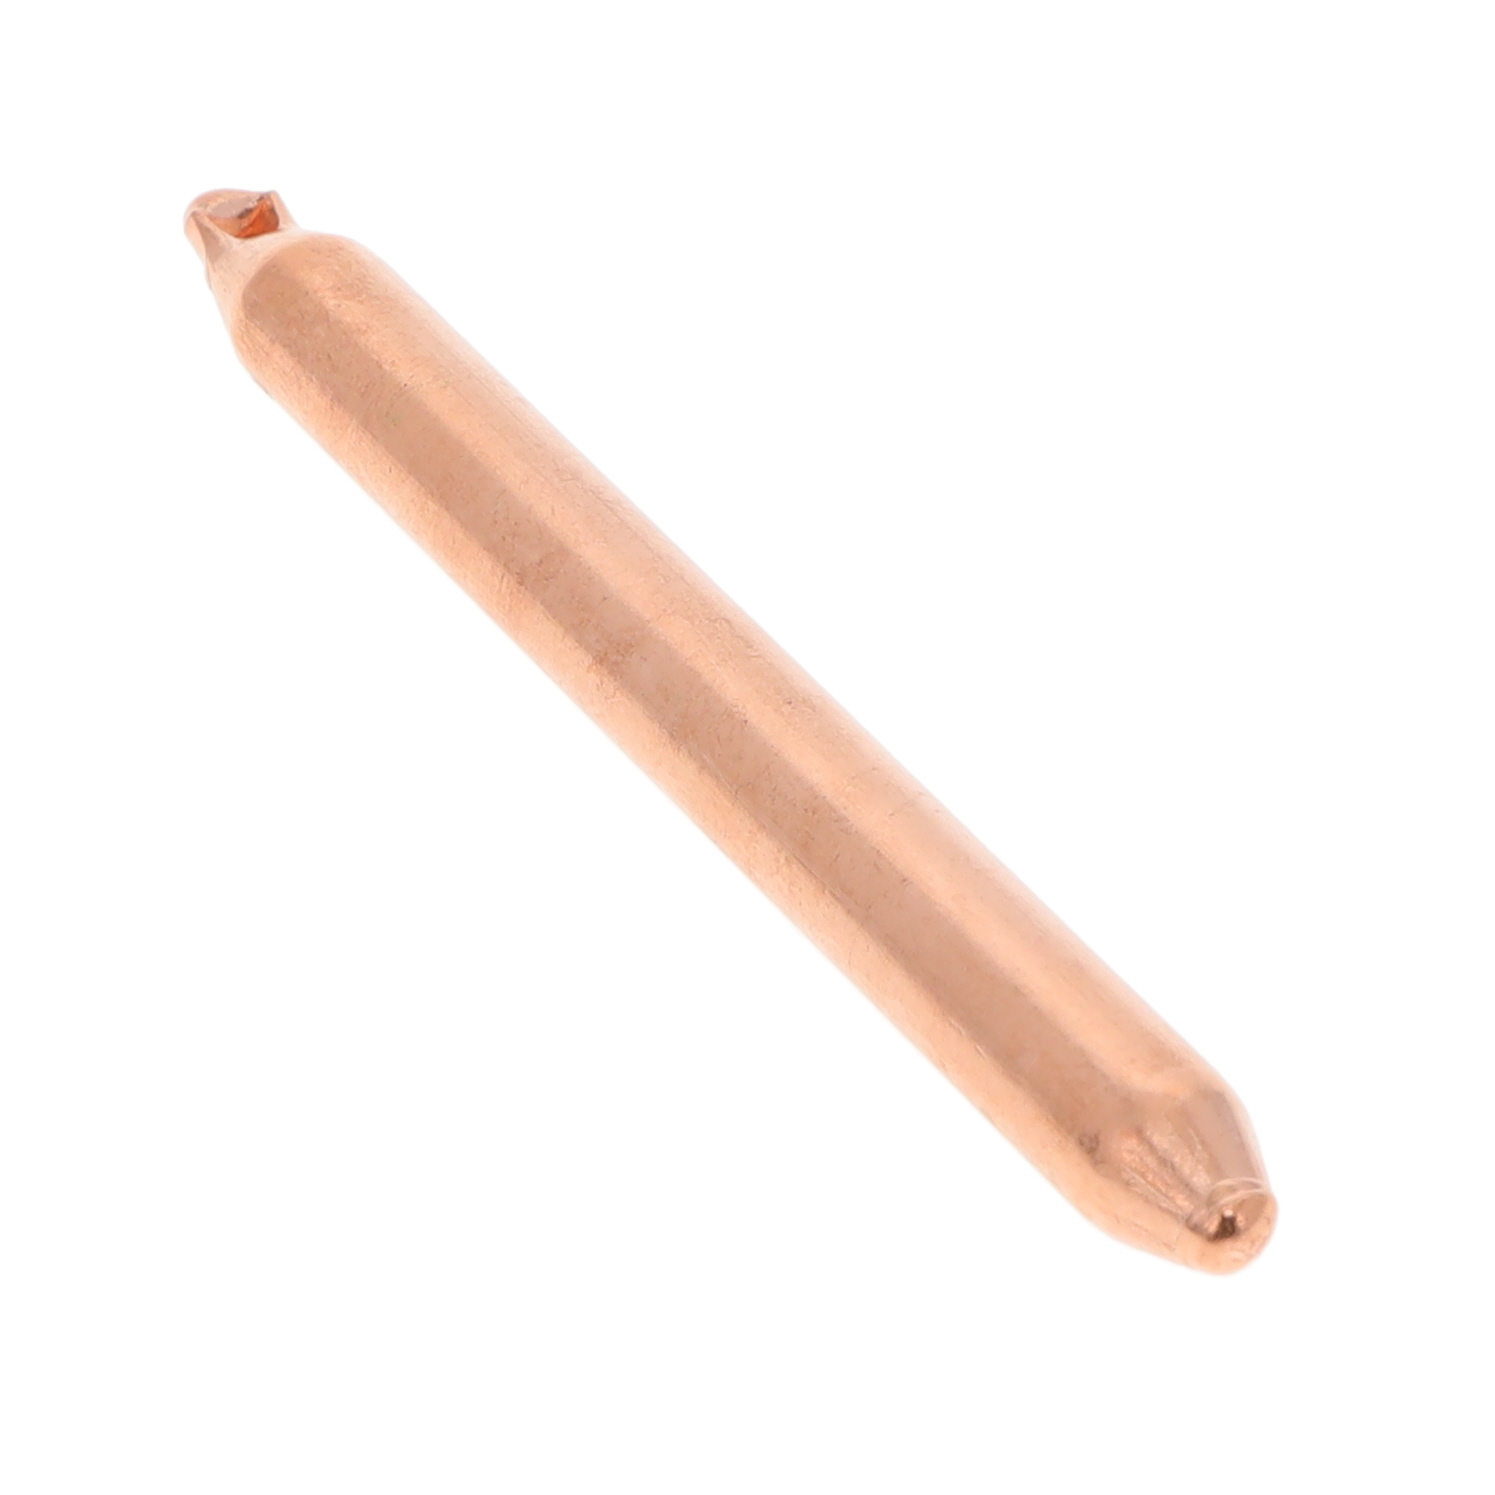 【HP-CWS-R10-101-K】COPPER-WATER HEAT PIPE, ROUND, D